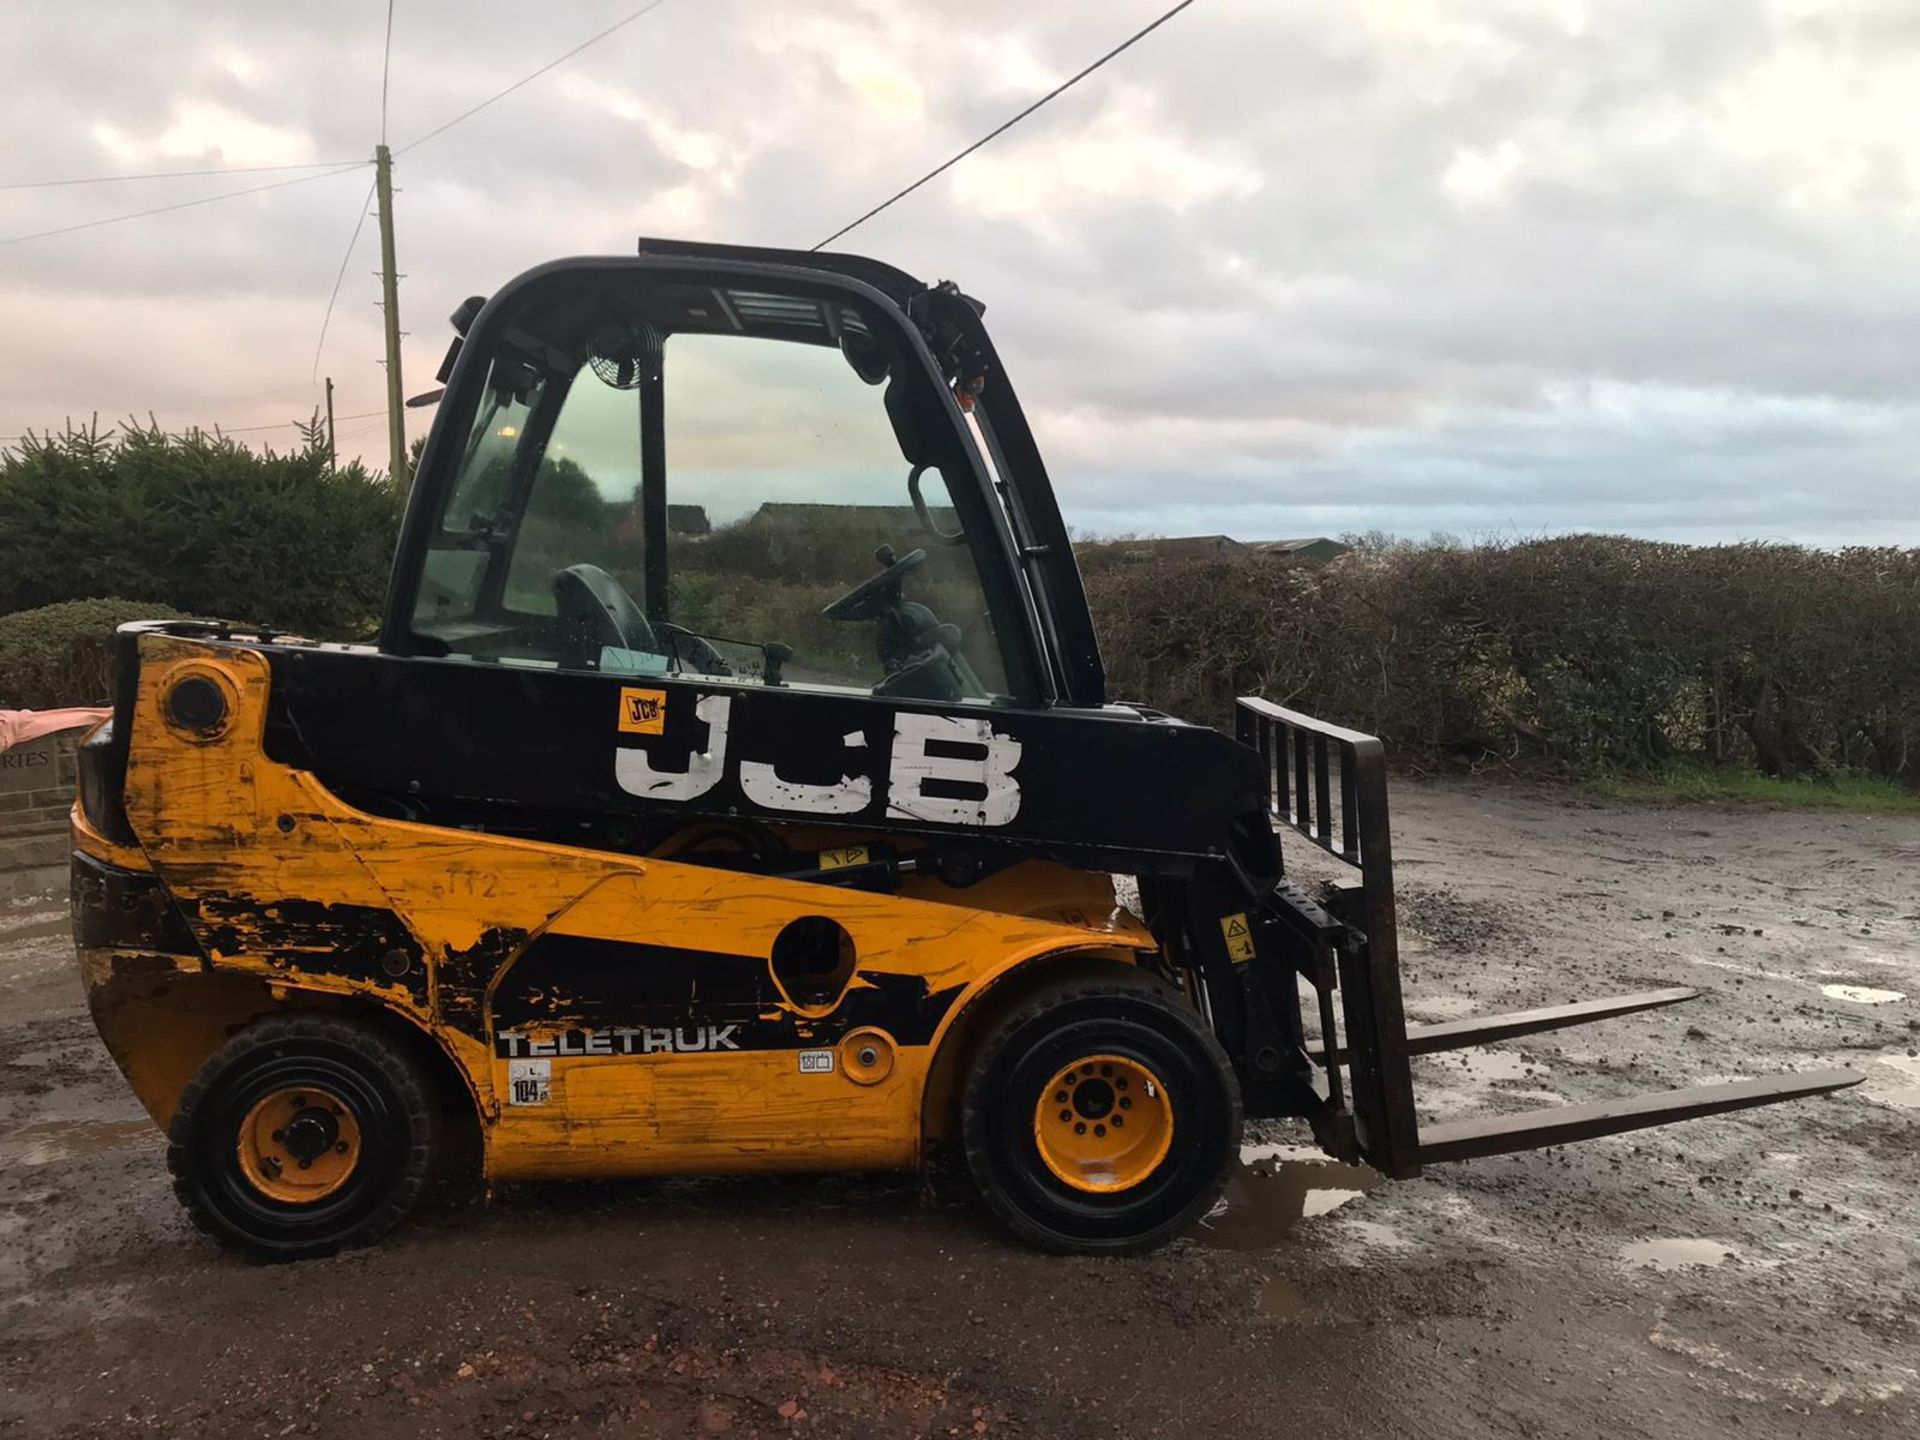 JCB TLT 30 TELETRUK, YEAR 2014, POWER 35.6 KW, WEIGHT 4900 KG, RUNS, WORKS AND LIFTS *PLUS VAT* - Image 4 of 6